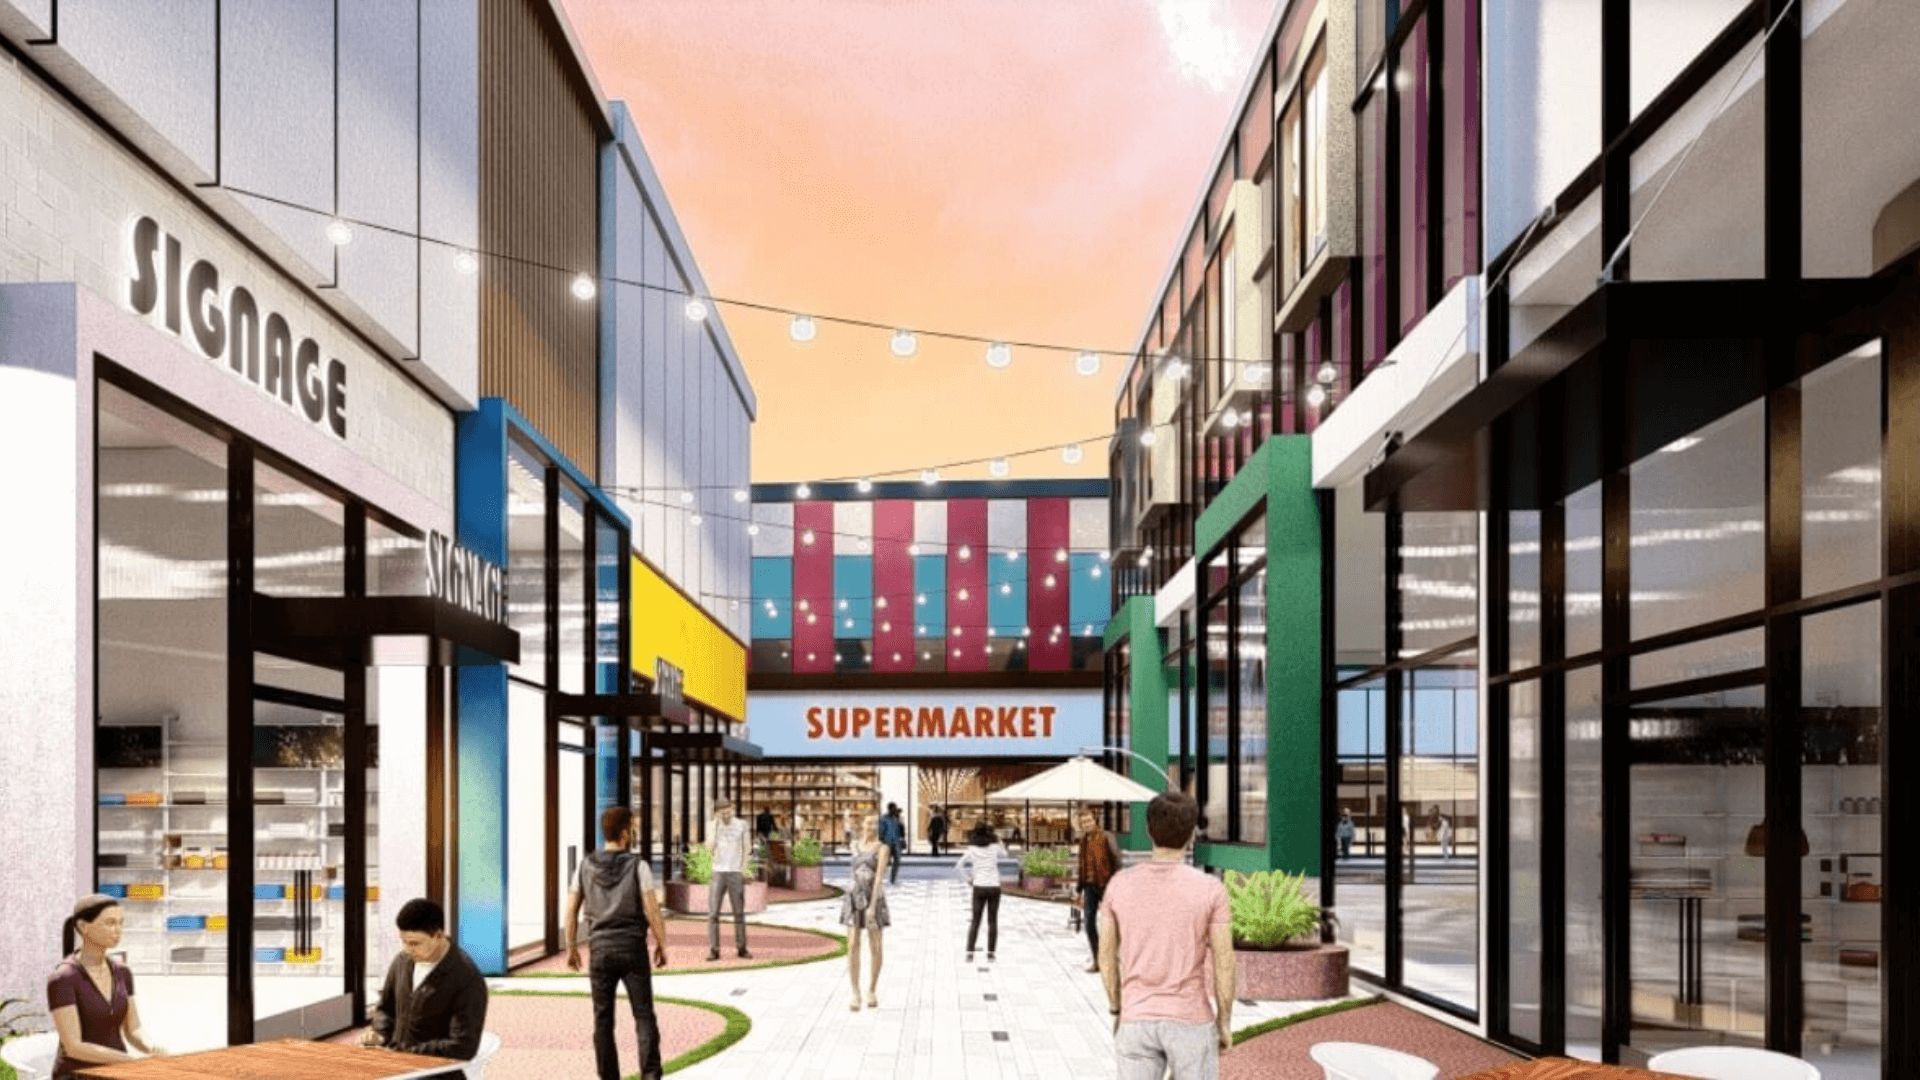 century 21 redevelopment-rendering of a colorful mall